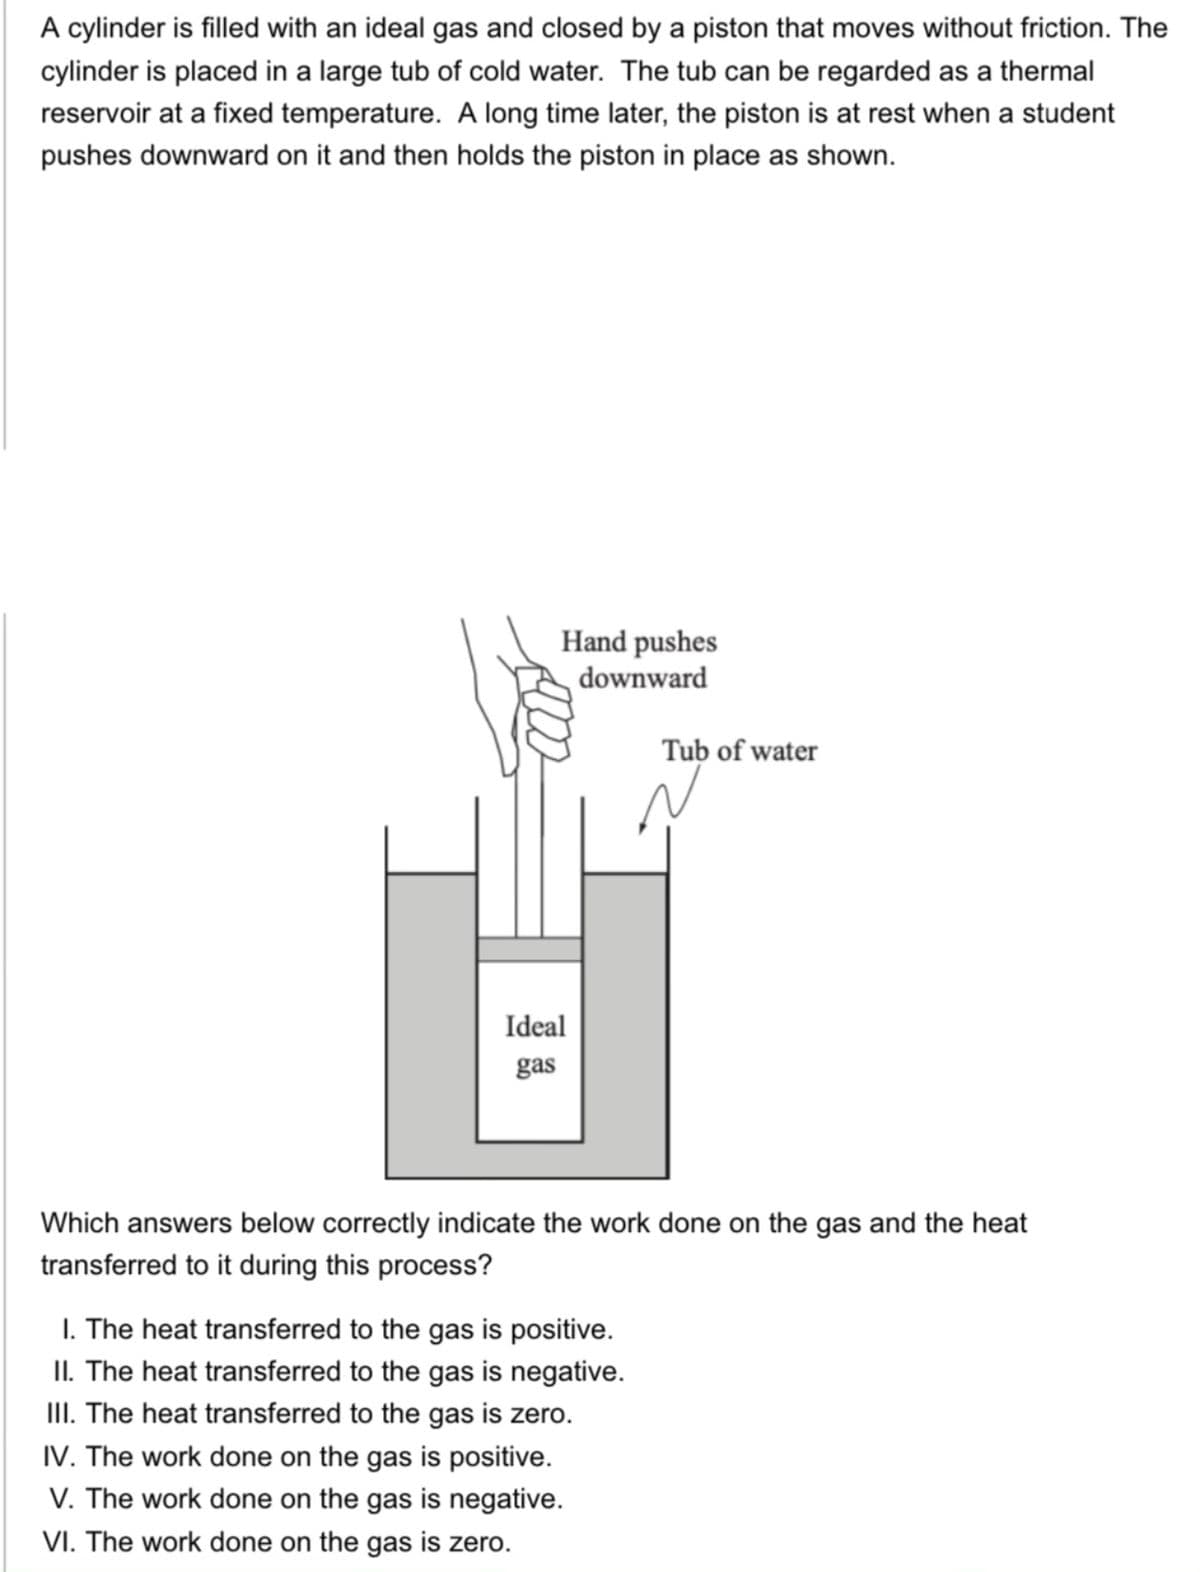 A cylinder is filled with an ideal gas and closed by a piston that moves without friction. The
cylinder is placed in a large tub of cold water. The tub can be regarded as a thermal
reservoir at a fixed temperature. A long time later, the piston is at rest when a student
pushes downward on it and then holds the piston in place as shown.
Hand pushes
downward
Tub of water
Ideal
gas
Which answers below correctly indicate the work done on the gas and the heat
transferred to it during this process?
I. The heat transferred to the gas is positive.
II. The heat transferred to the gas is negative.
III. The heat transferred to the gas is zero.
IV. The work done on the gas is positive.
V. The work done on the gas is negative.
VI. The work done on the gas is zero.
